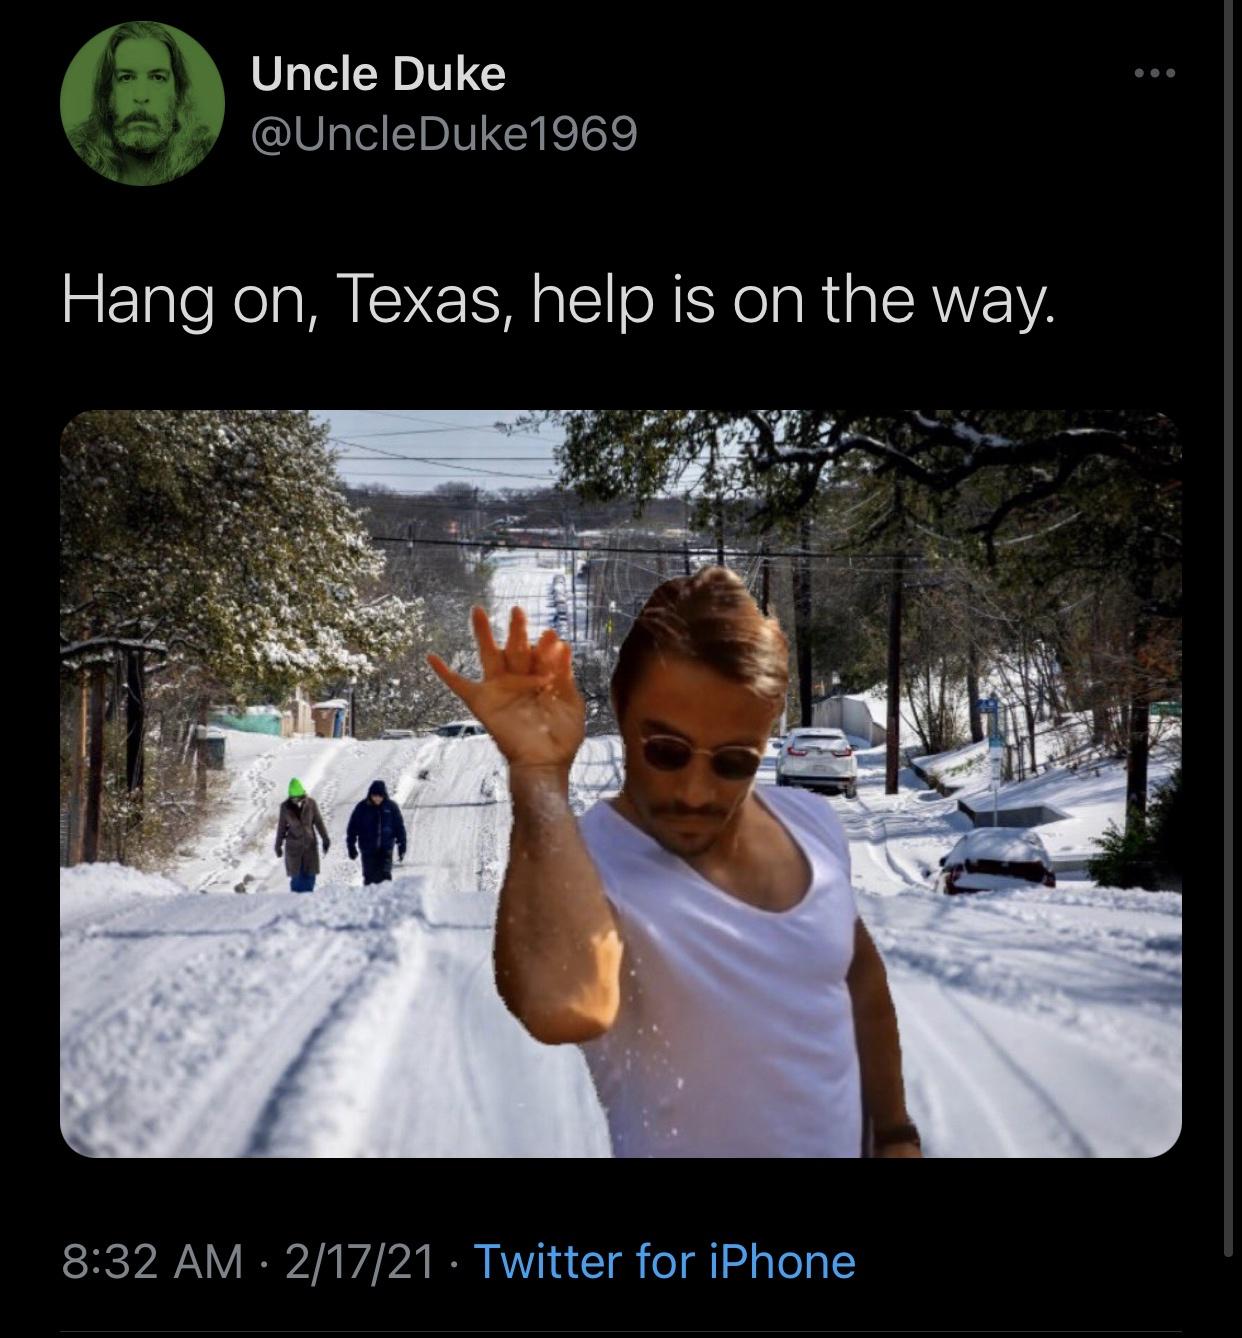 snow - Uncle Duke Hang on, Texas, help is on the way. 21721 Twitter for iPhone